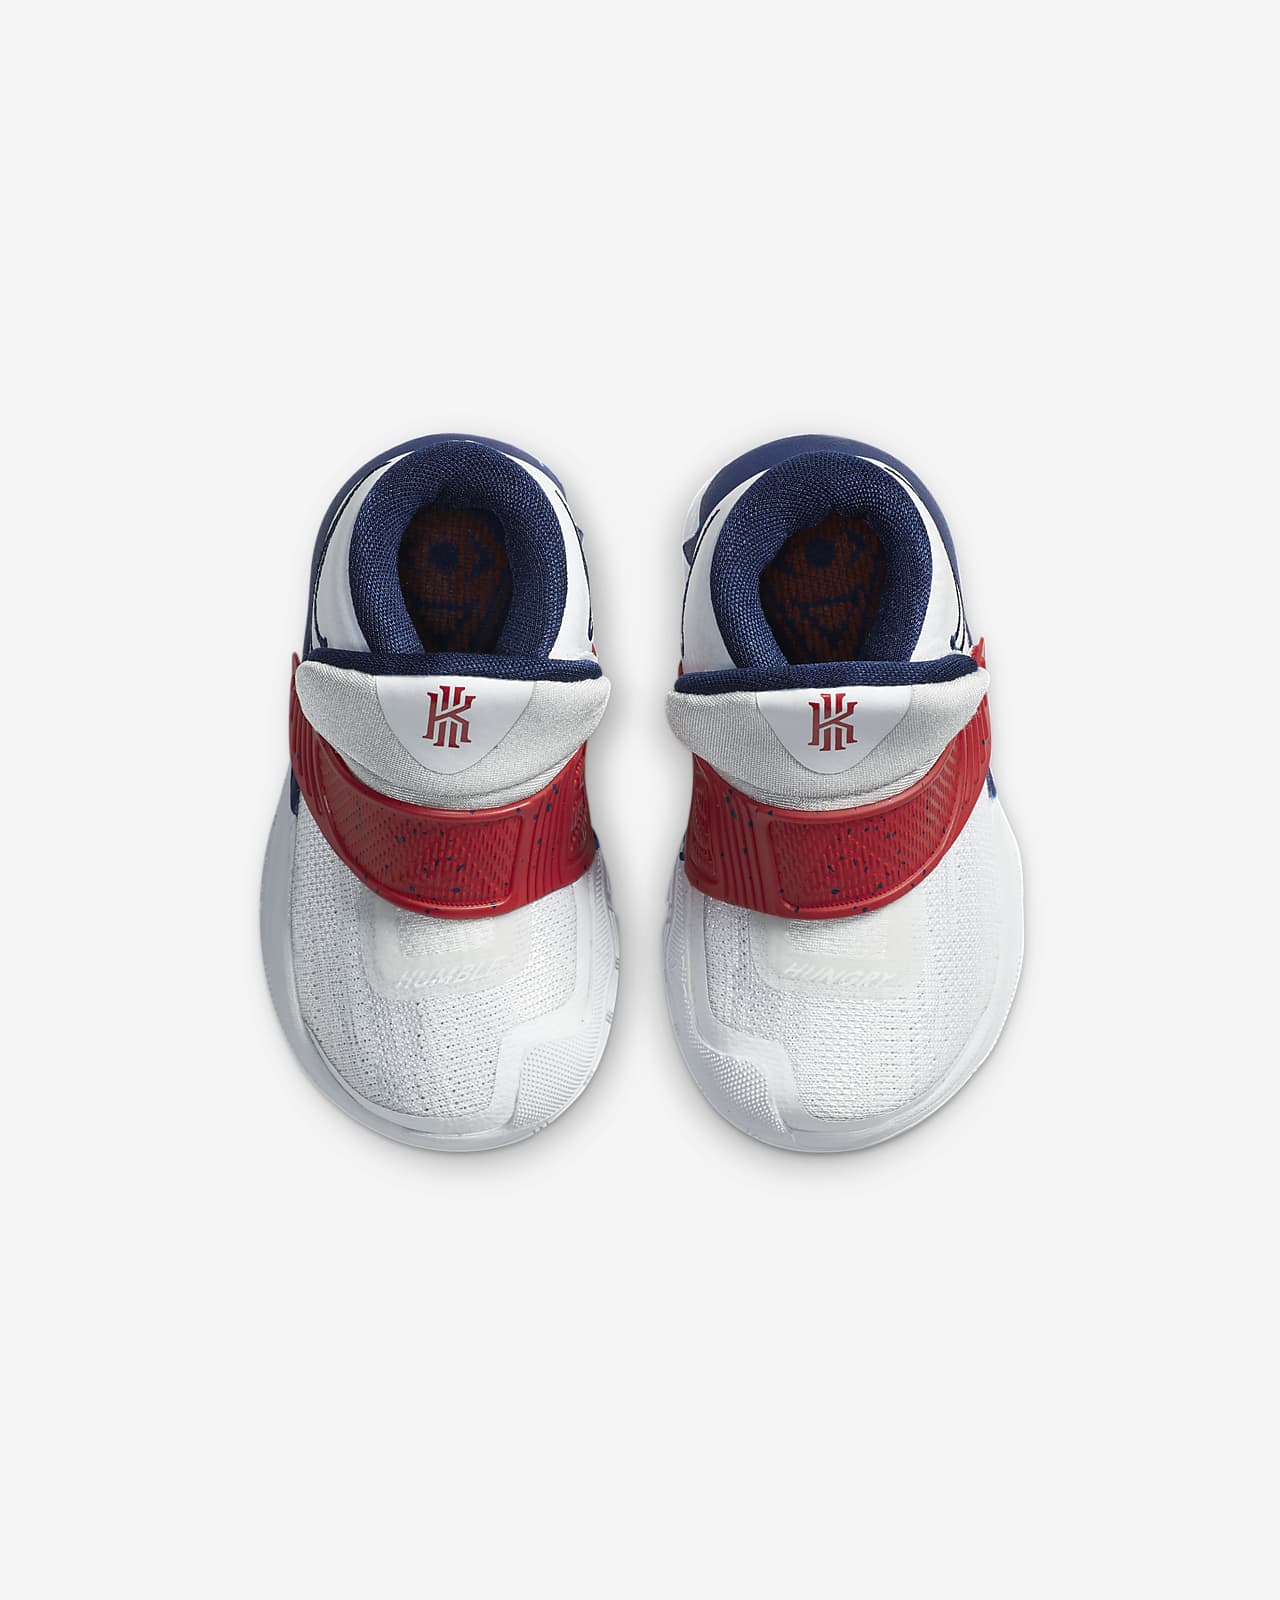 nike kyrie toddler shoes